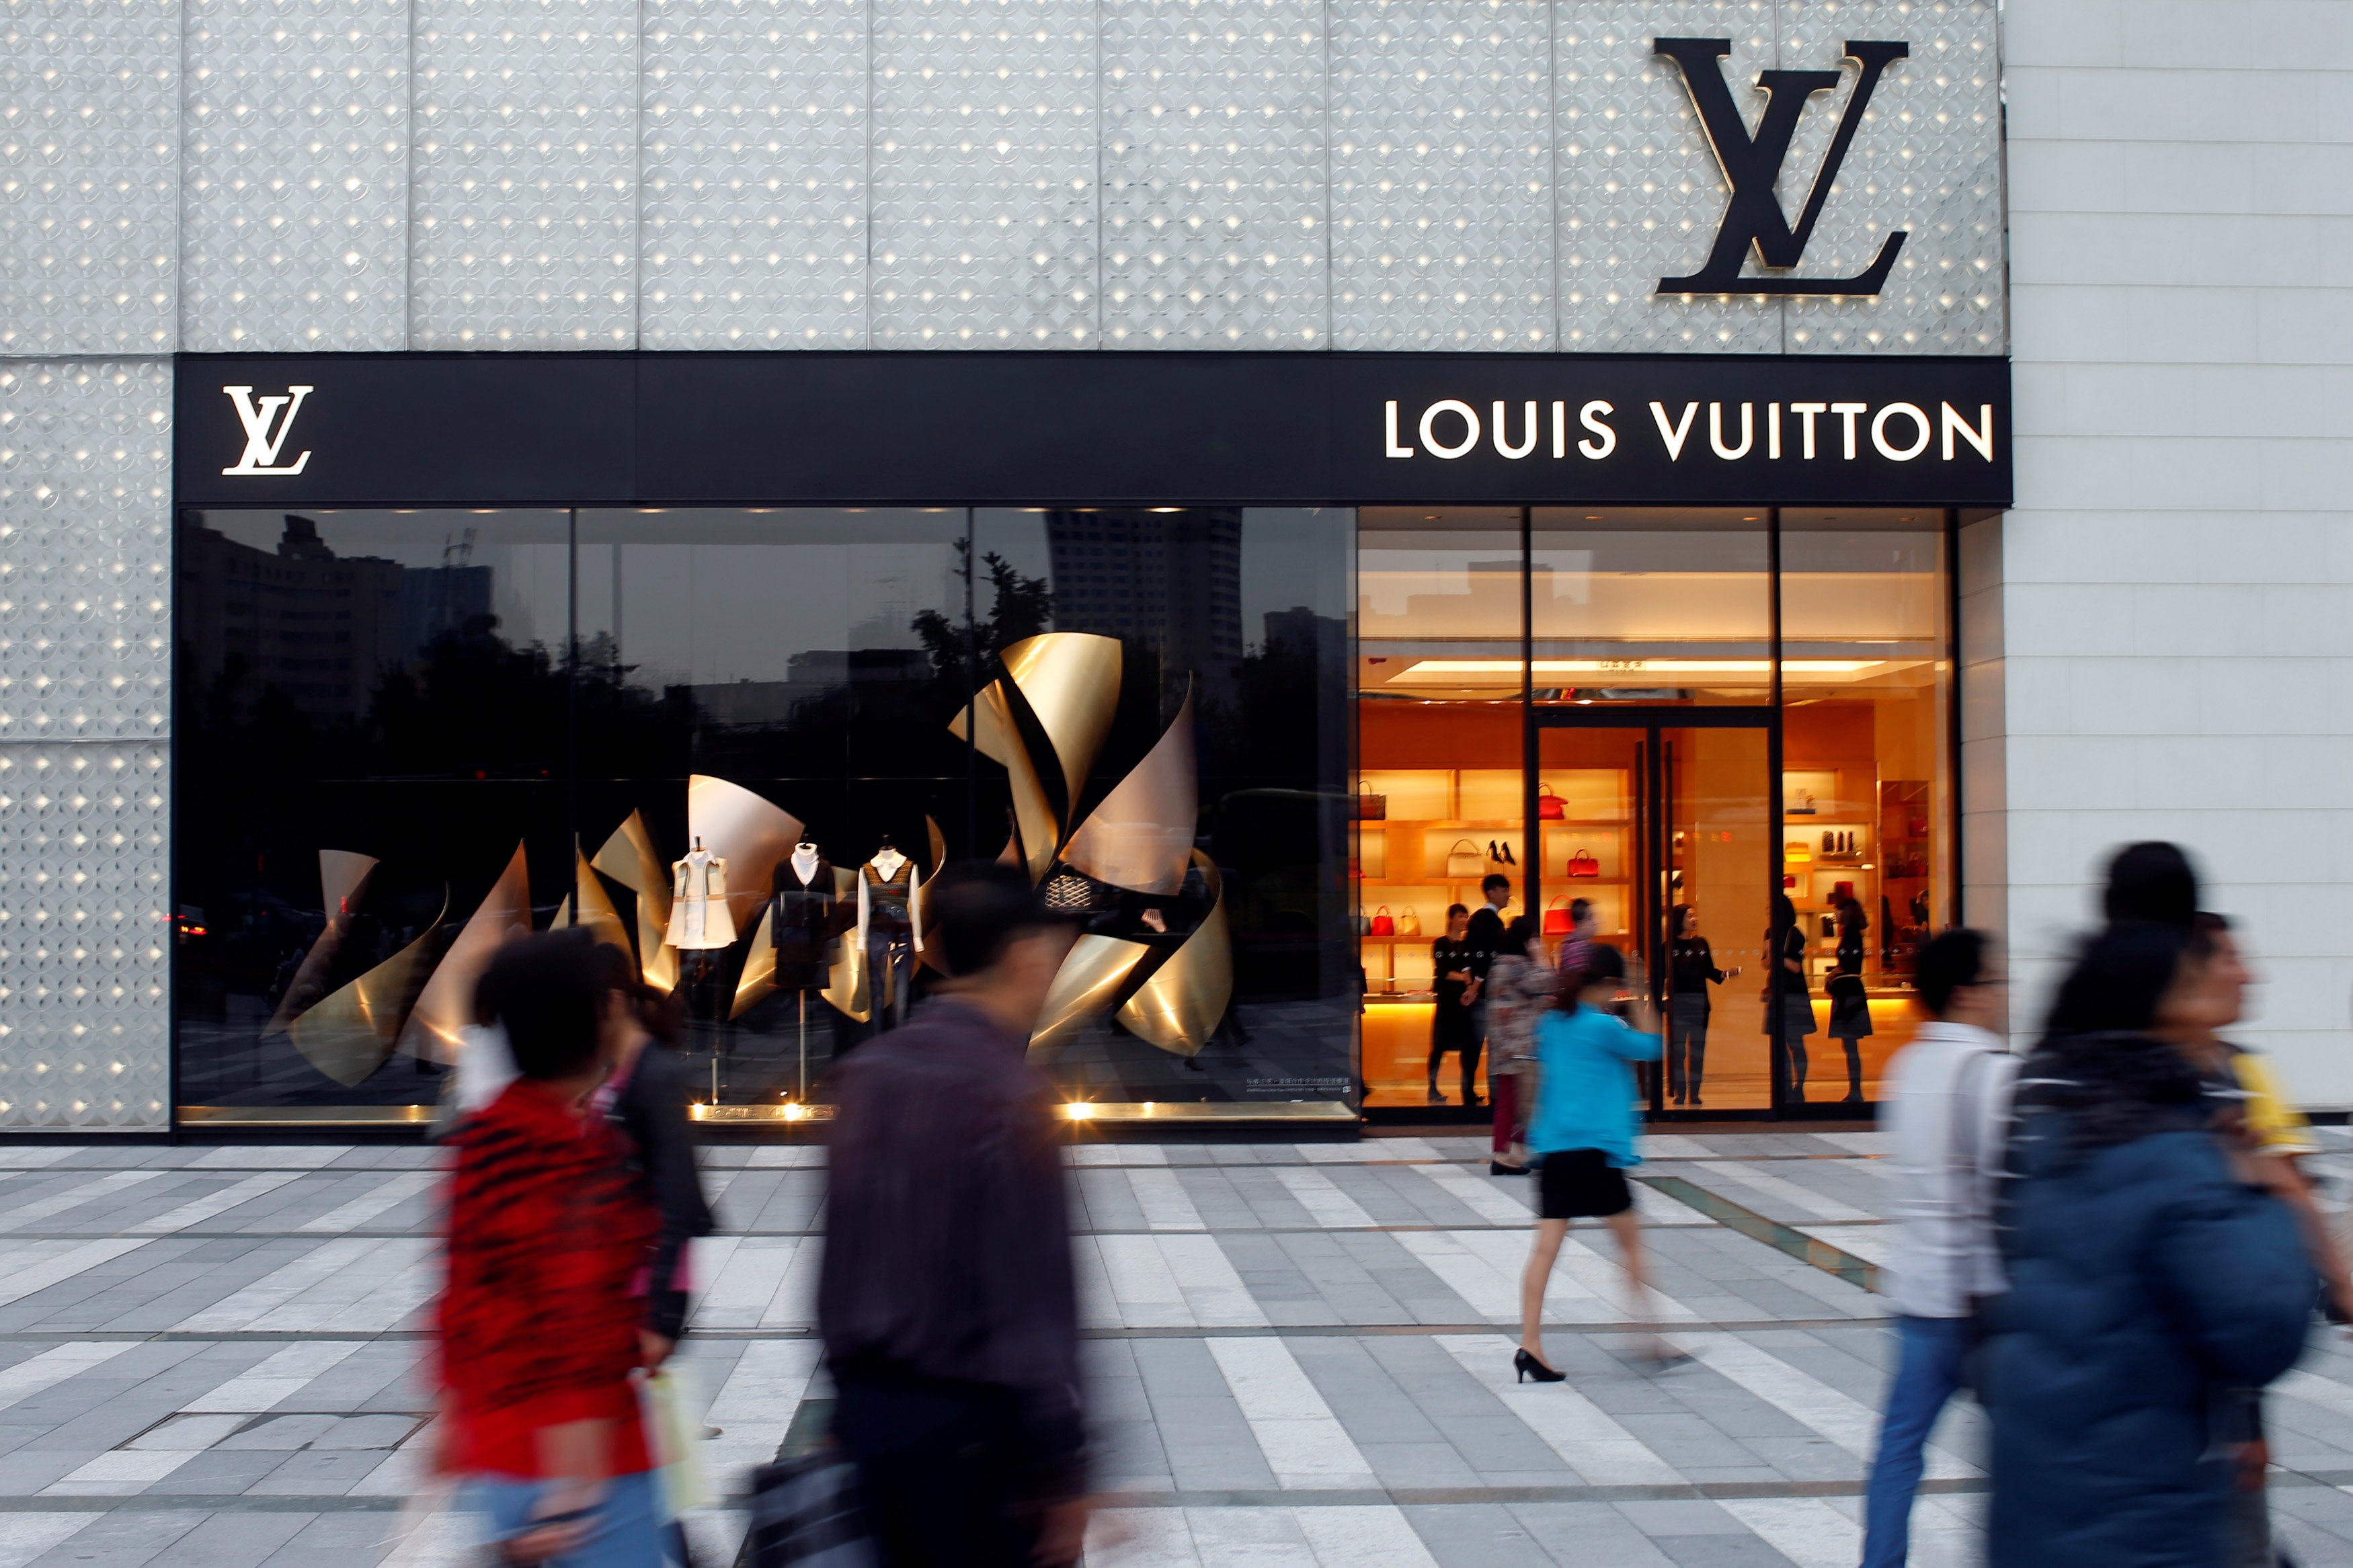 Why is China obsessed with luxury brands? Status-conscious buyers